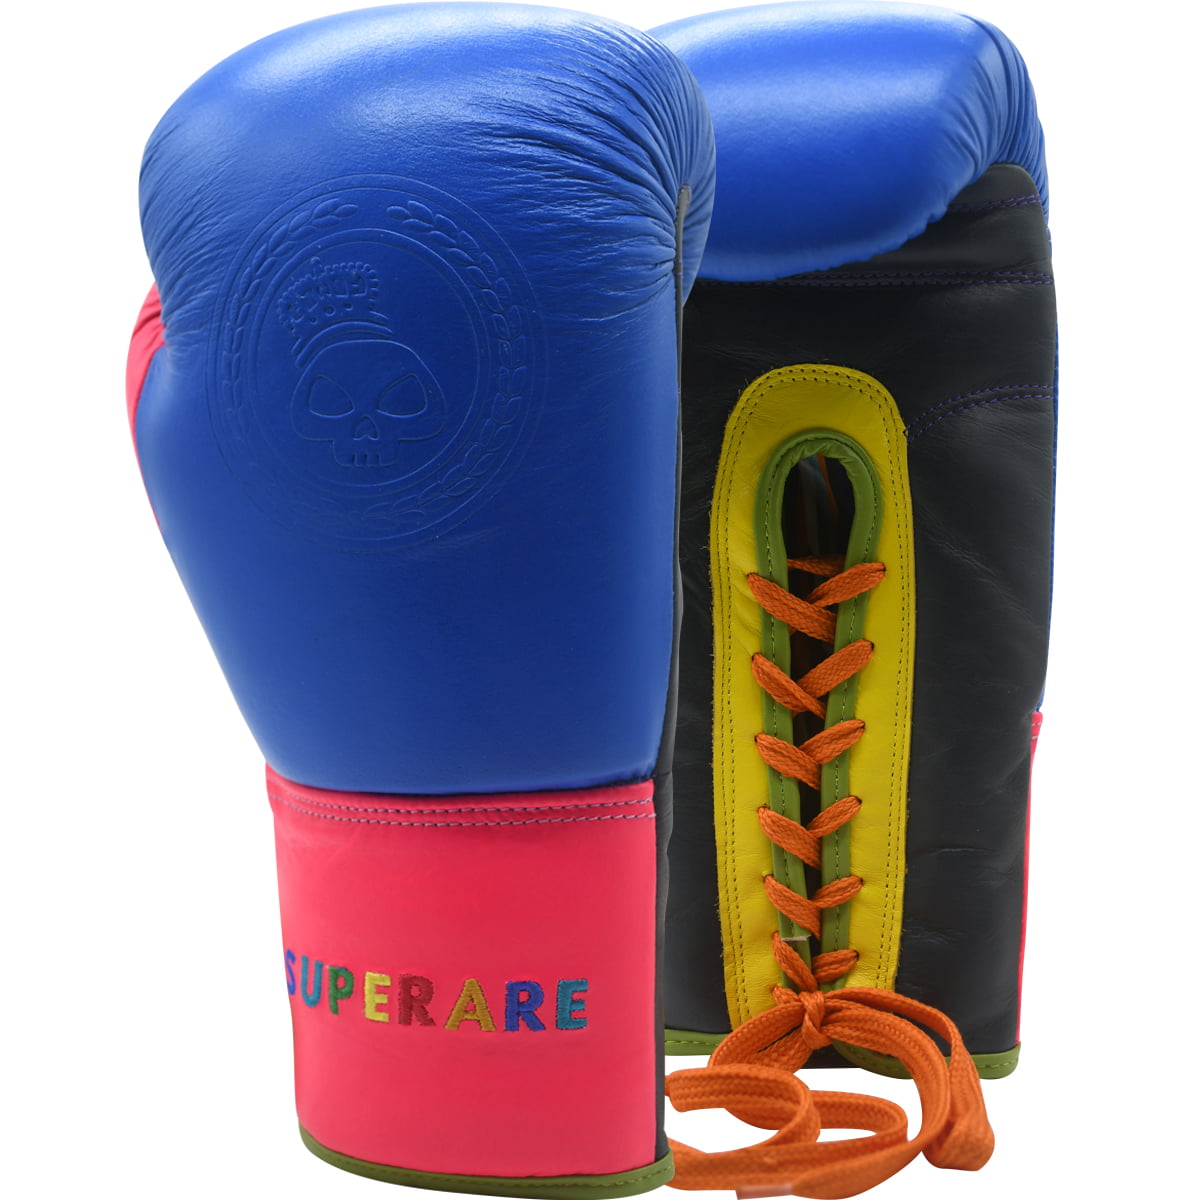 Red/White/Blue Superare Americana Lace Up Training Boxing Gloves 